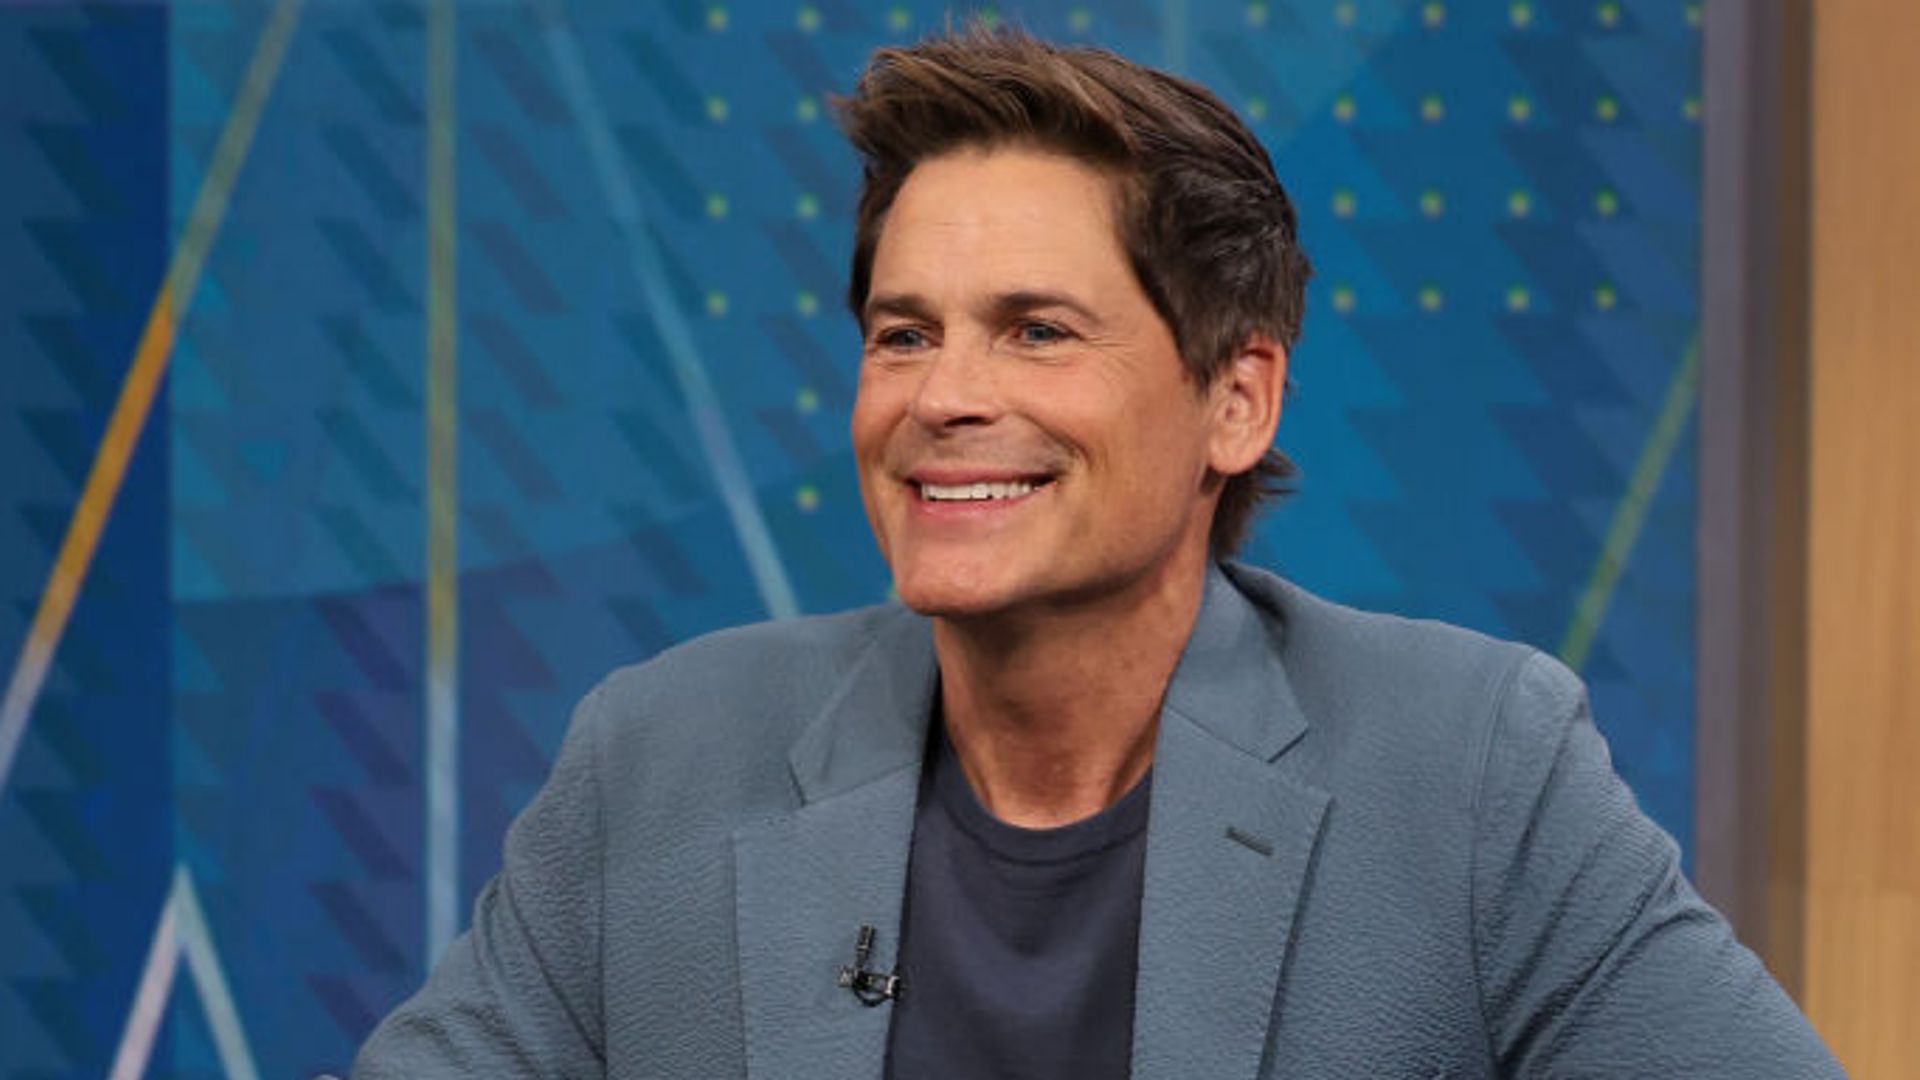 9-1-1: Lone Star actor Rob Lowe's romance with royal revealed